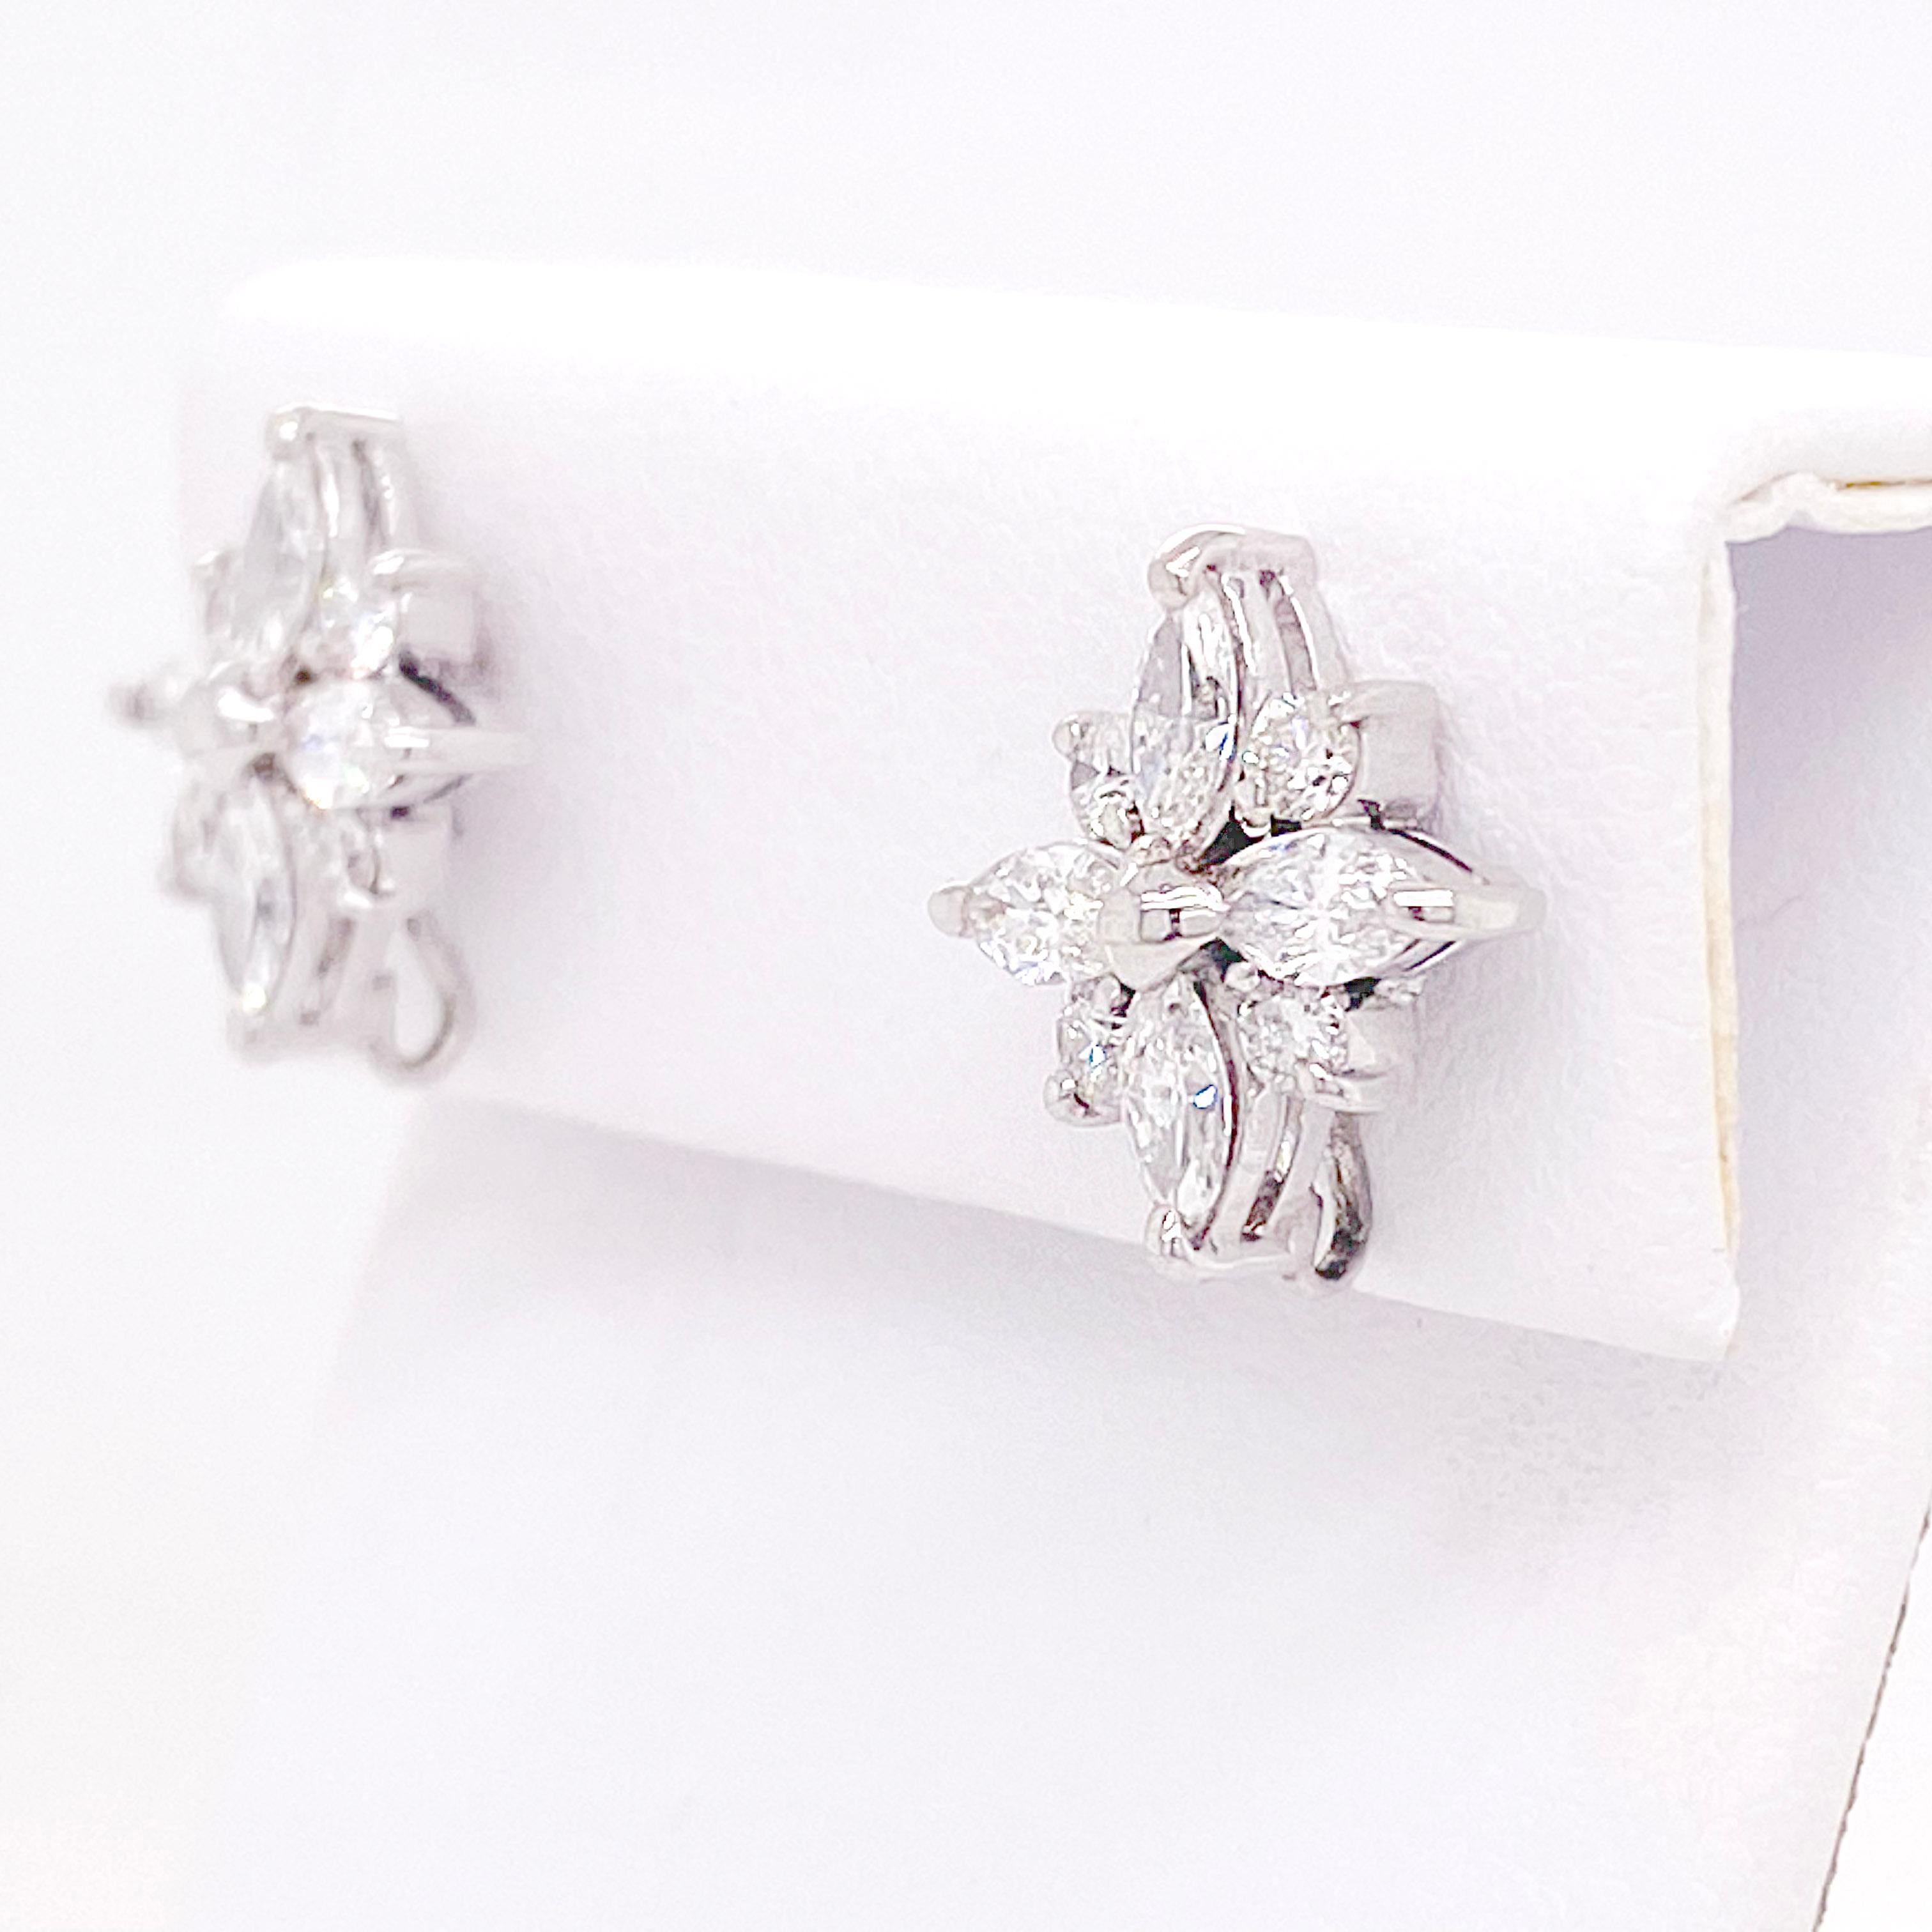 The B Blossom has the core 4 marquise diamonds accented by 4 round brilliant cut diamonds. Set in a gorgeous white gold setting there is a hidden wire that can hold any earring charm. Earring charms are sold by Jude Frances and many other jewelry